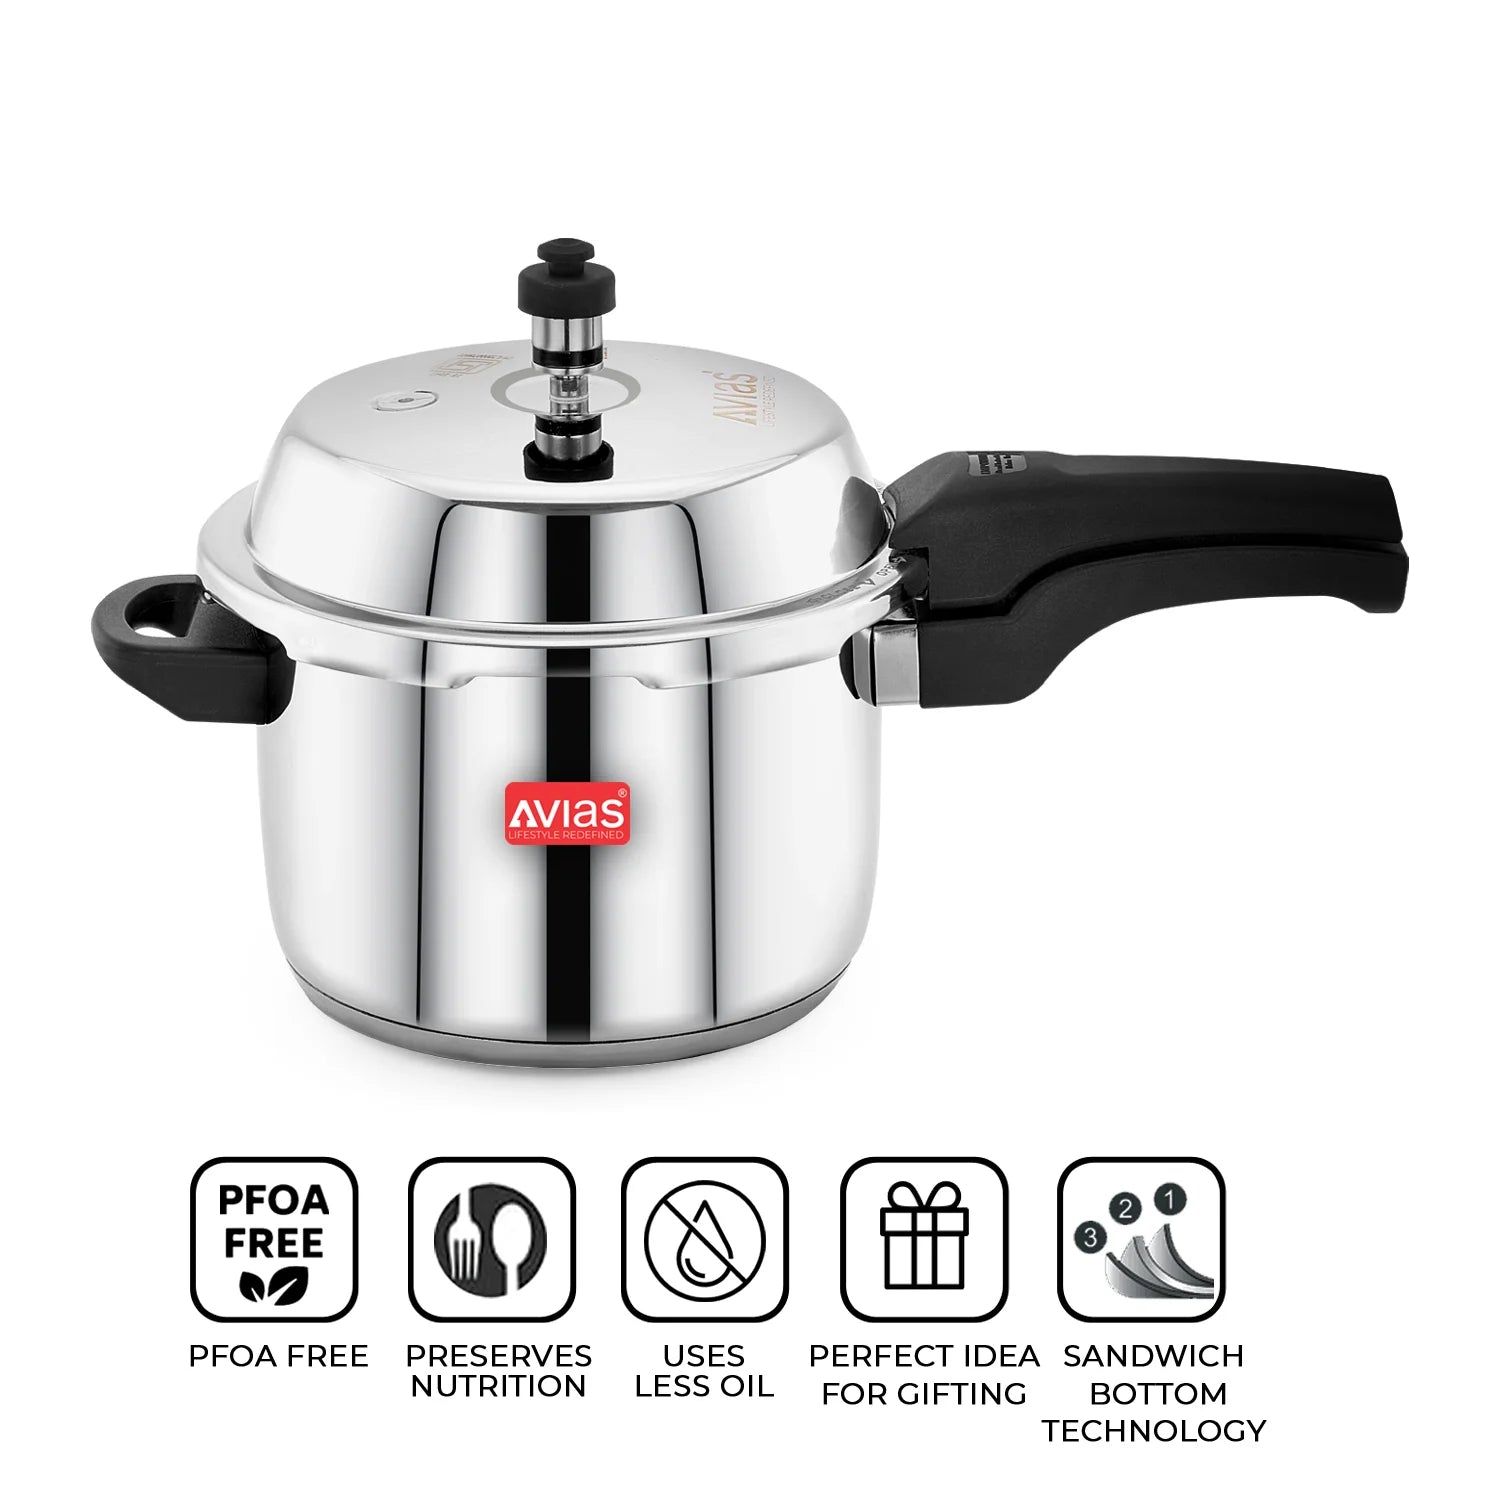 Ceres stainless steel premium outer lid pressure cooker uses